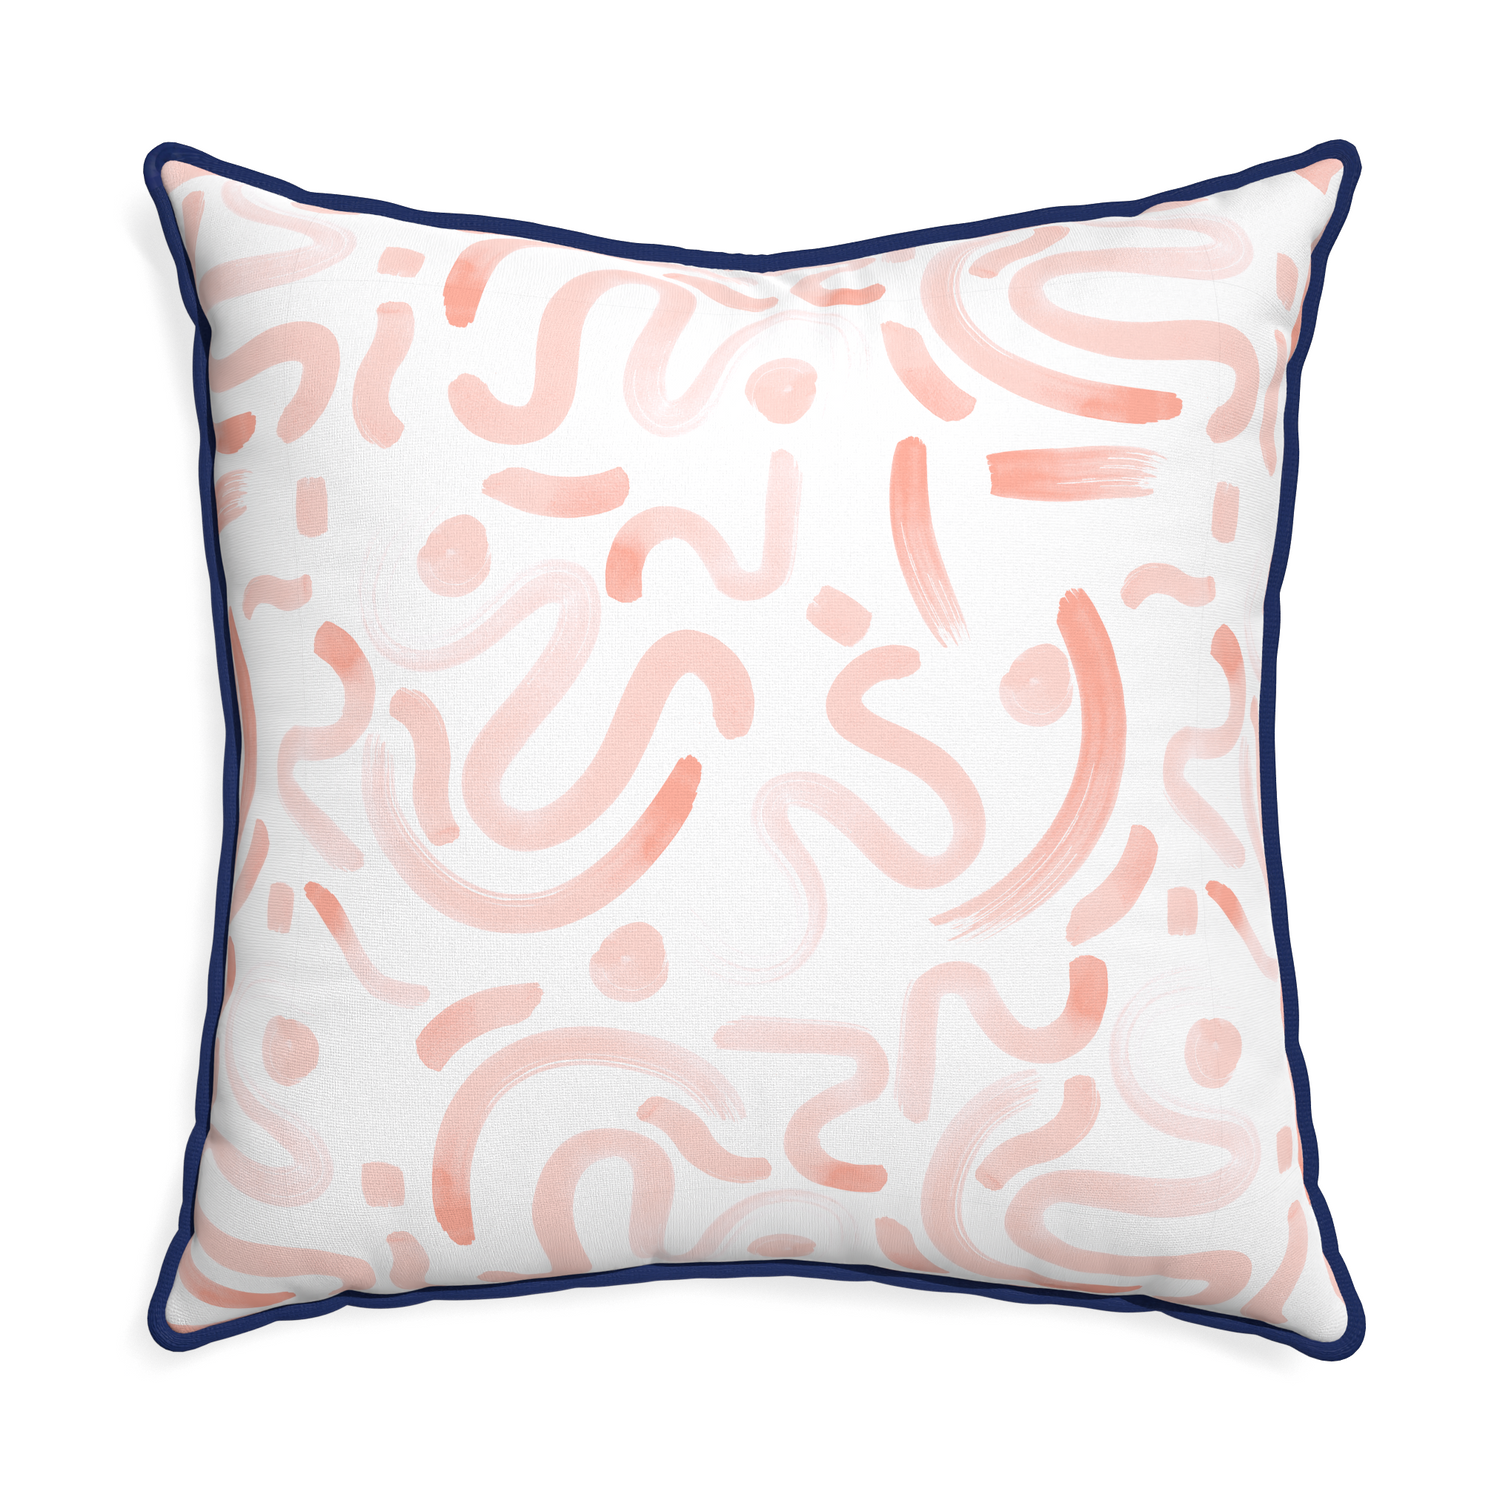 Euro-sham hockney pink custom pink graphicpillow with midnight piping on white background